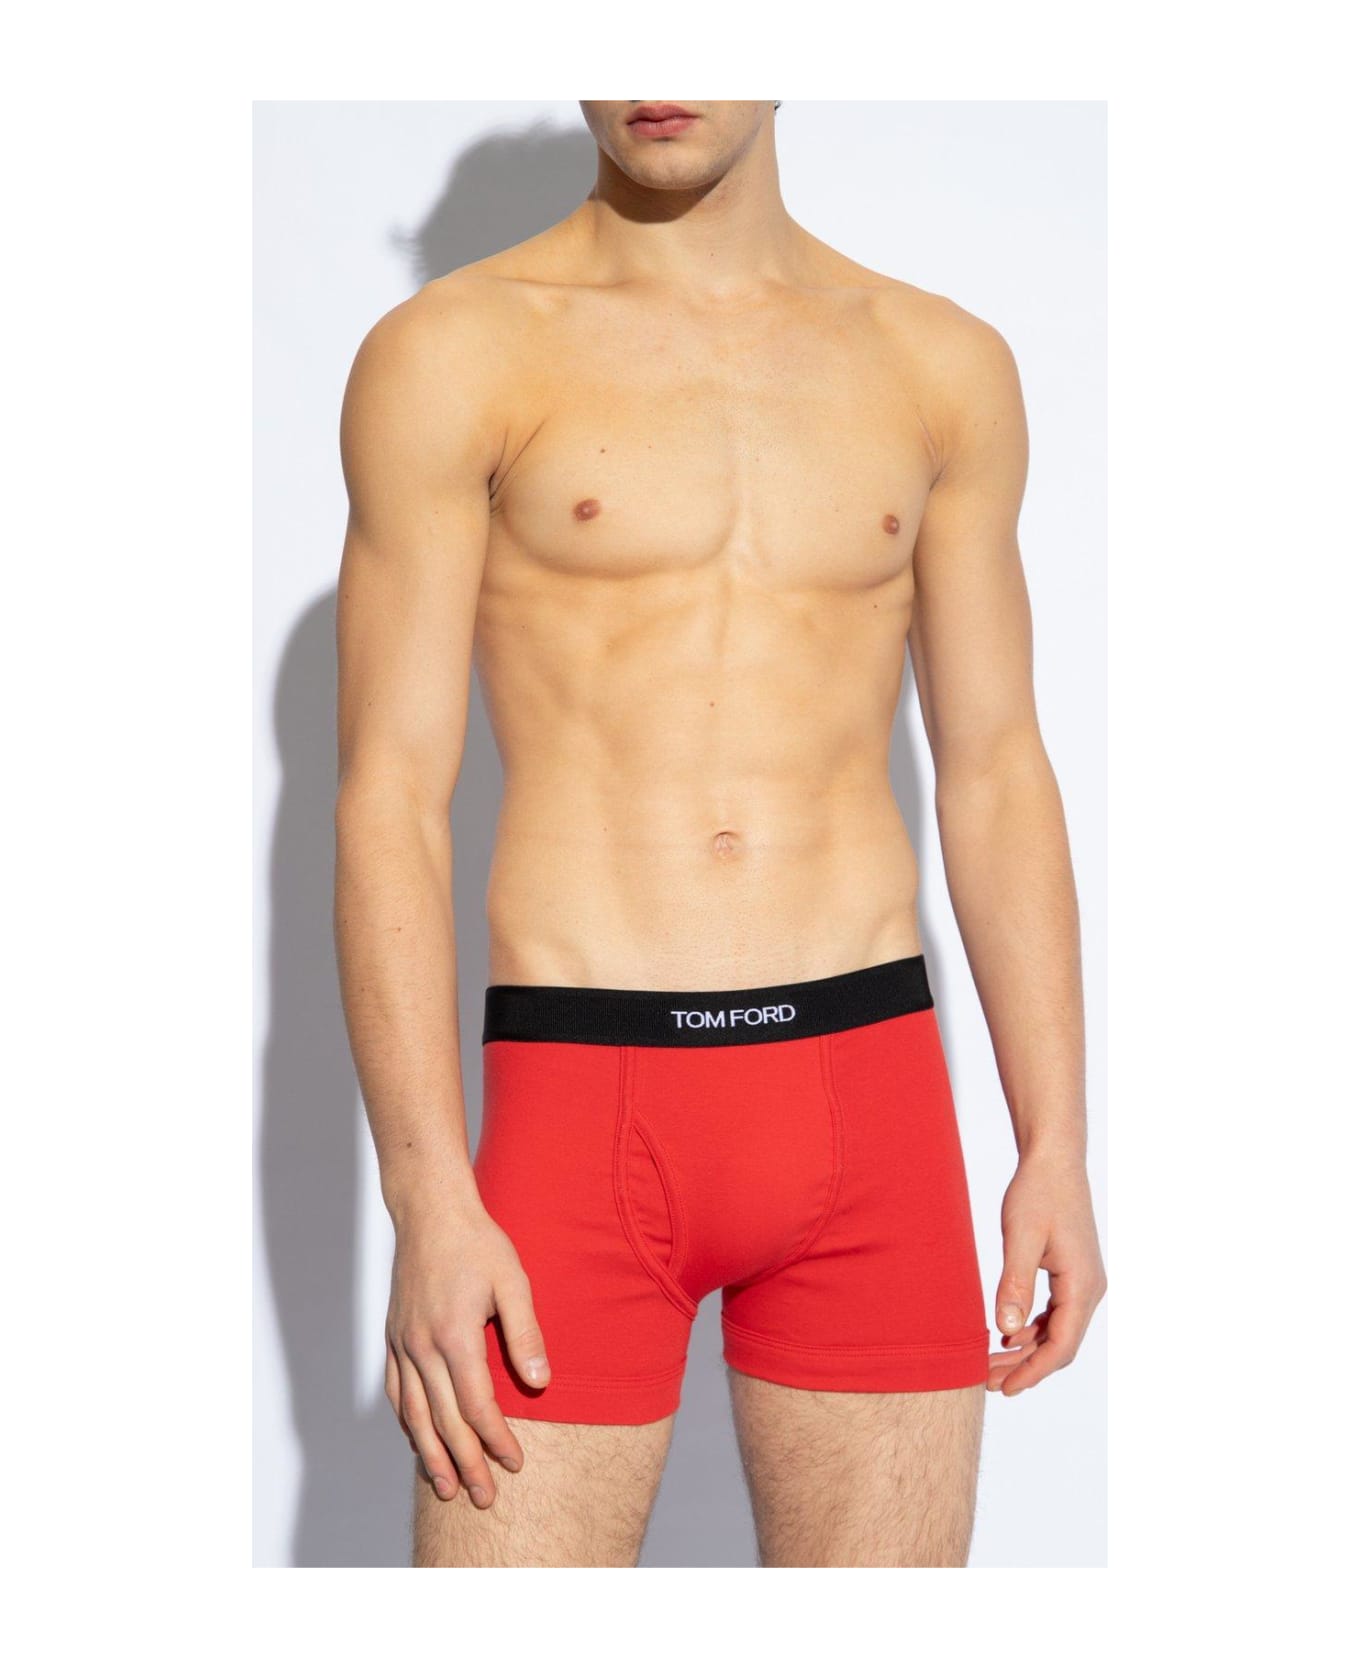 Tom Ford Logo Waistband Boxers - RED